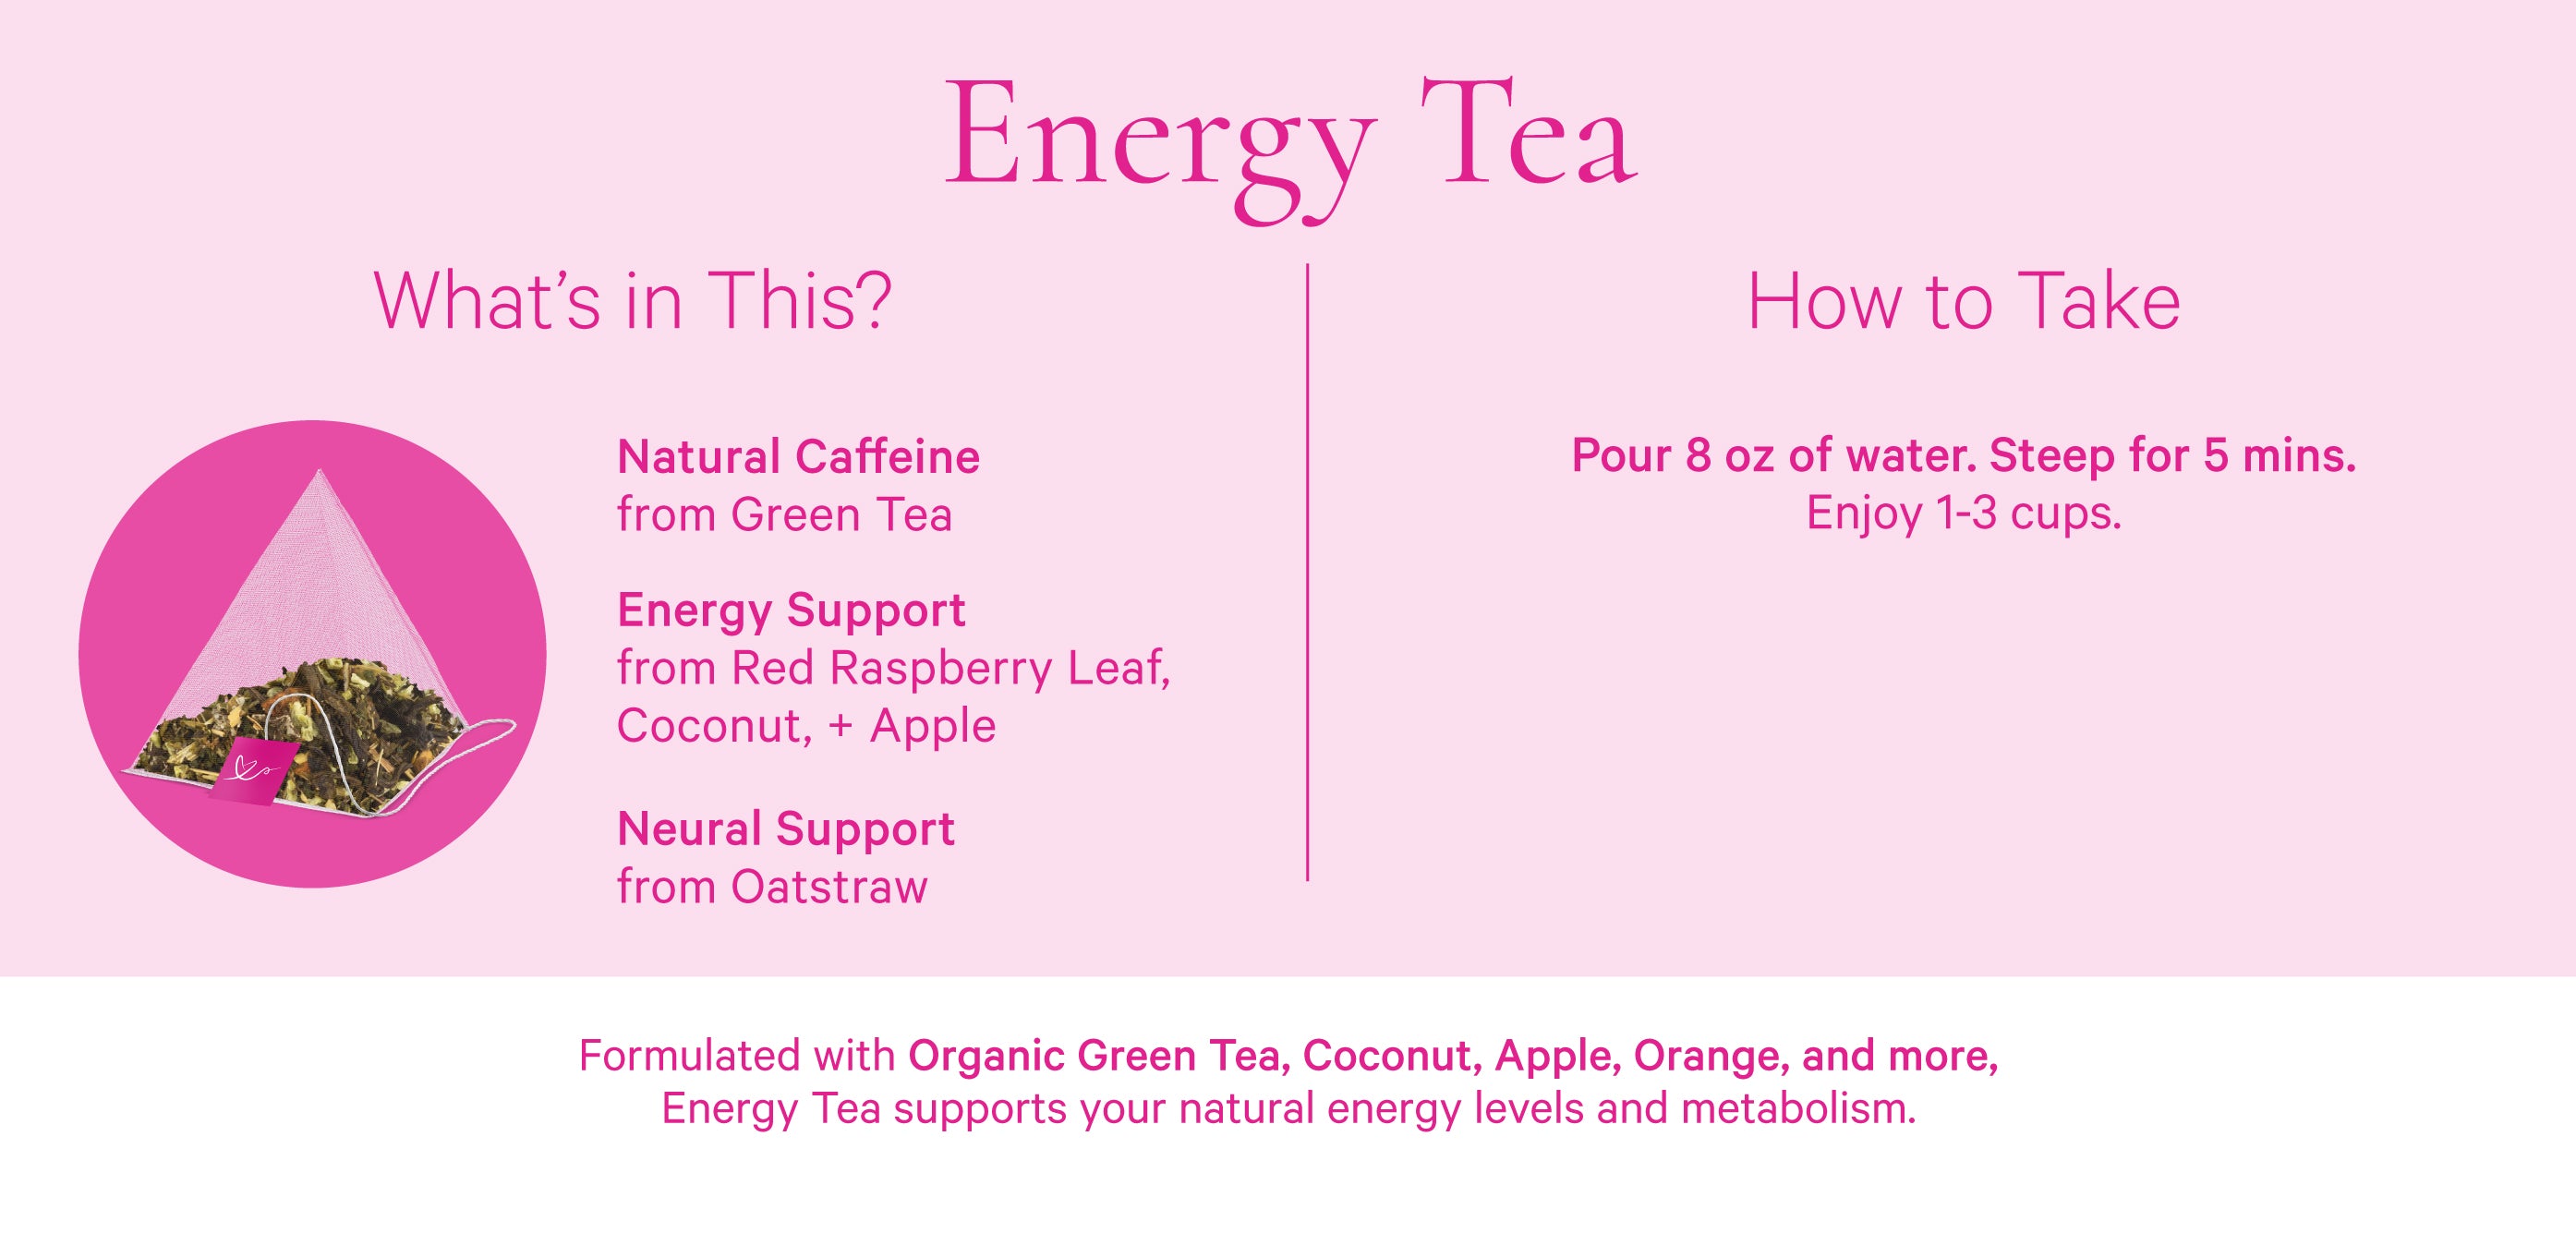 Energy Tea. What's in this? Natural Caffeine from Green Tea. Energy Support from Red Raspberry Leaf, Coconut, + Apple. Neural Support from Oatstraw. How to Take. Pour 8 oz of water. Steep for 5 mins. Enjoy 1-3 cups.
          Formulated with Organic Green Tea, Coconut, Apple, Orange, and more, Energy Tea supports your natural energy levels and metabolism.